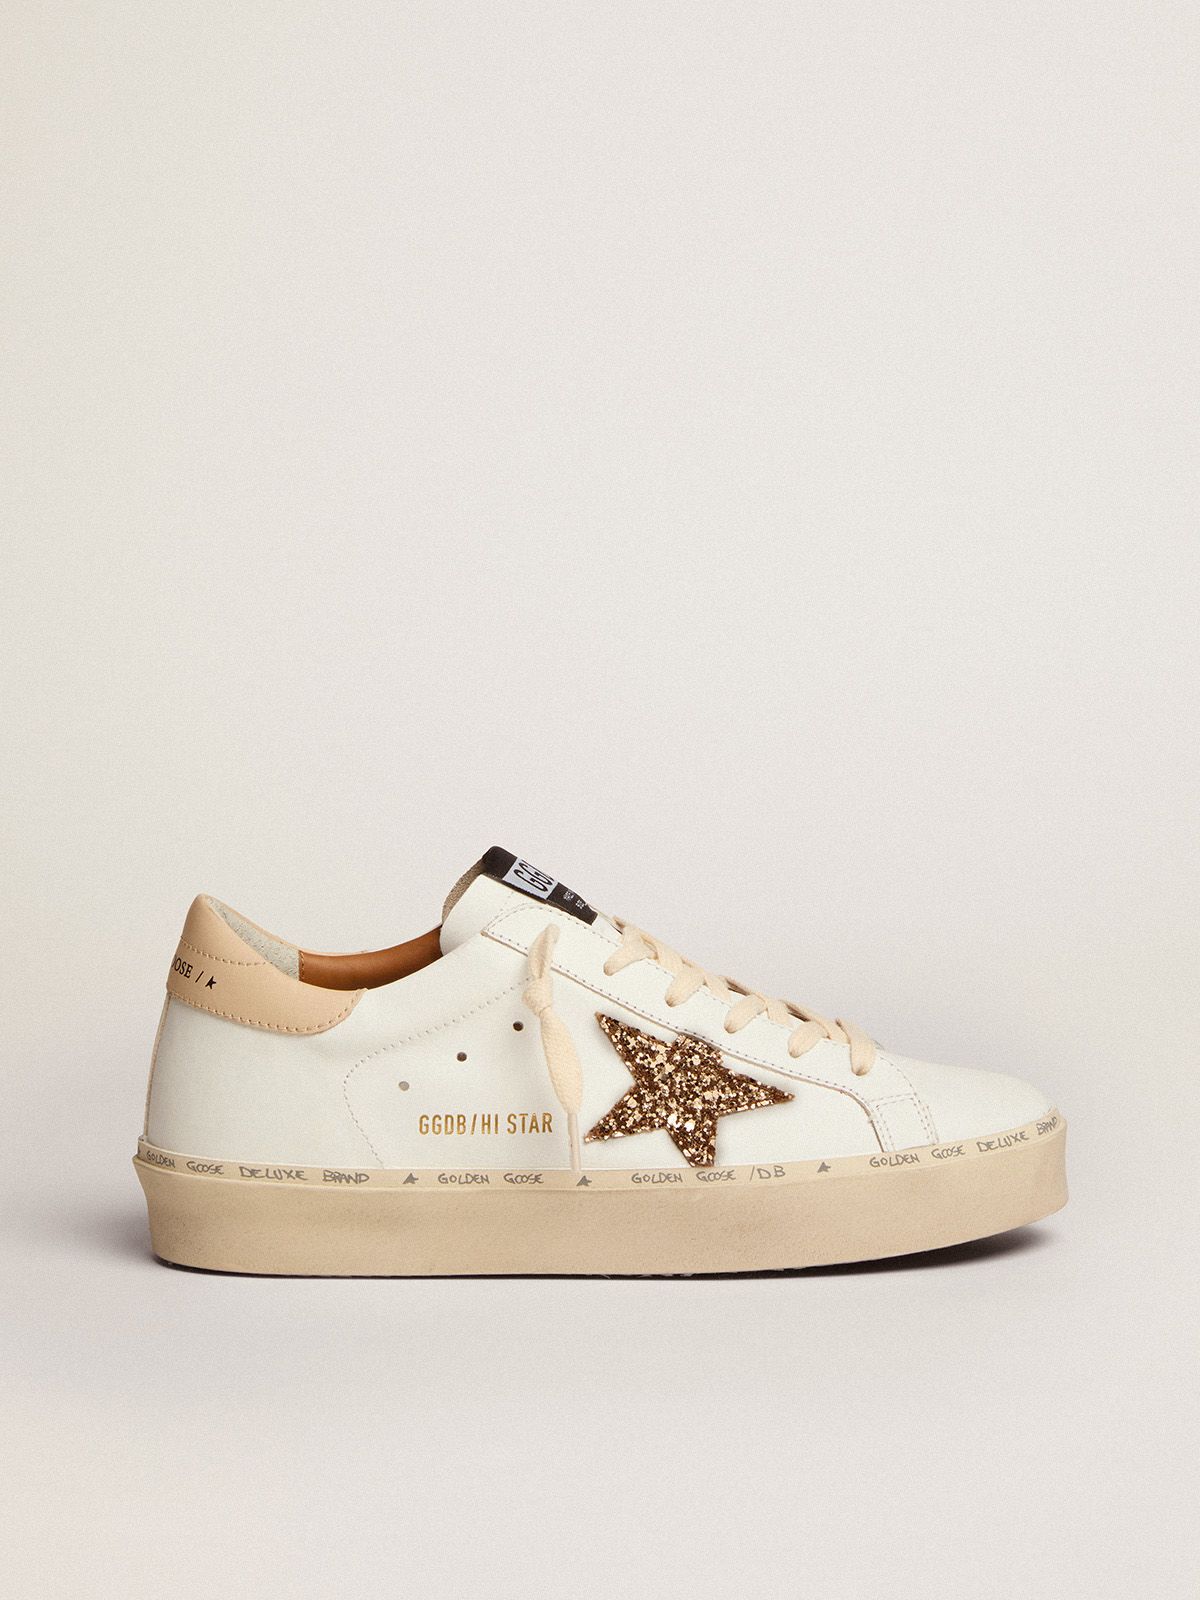 Hi Star sneakers with gold glitter star and beige leather heel tab